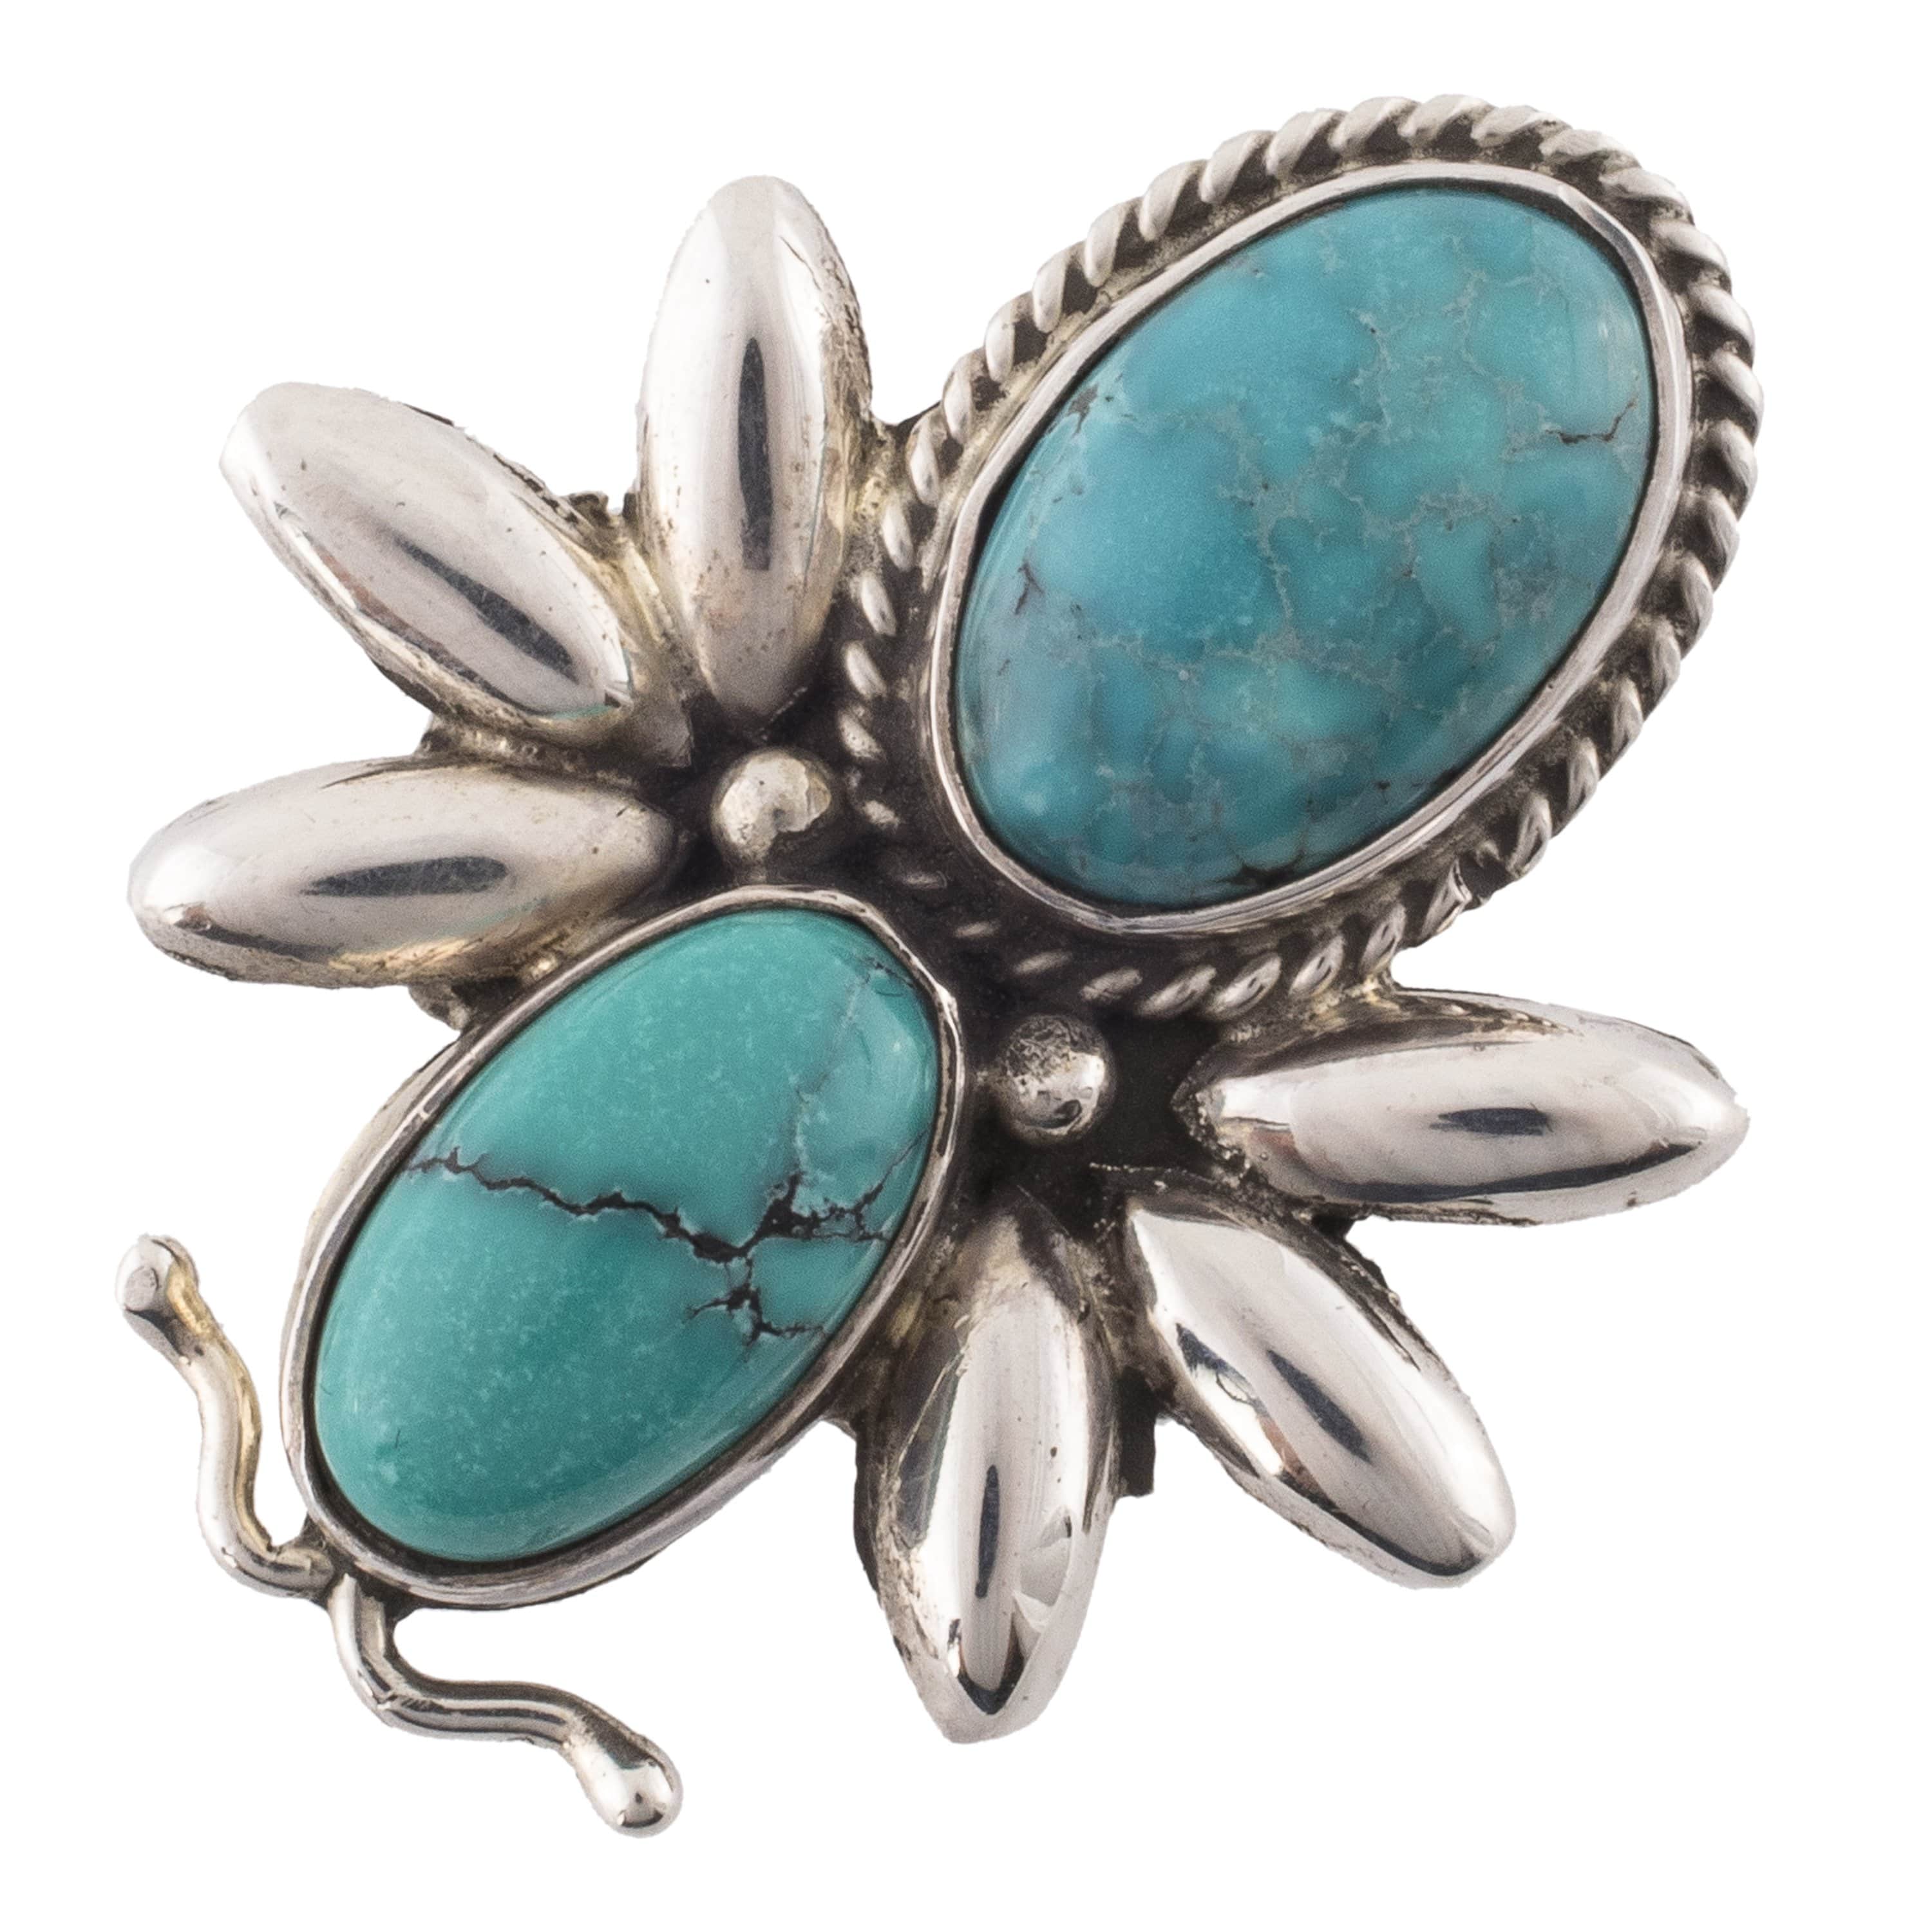 Kalifano Native American Jewelry 5.5 Dragonfly Campitos Turquoise USA Native American Made 925 Sterling Silver Ring NAR300.029.55